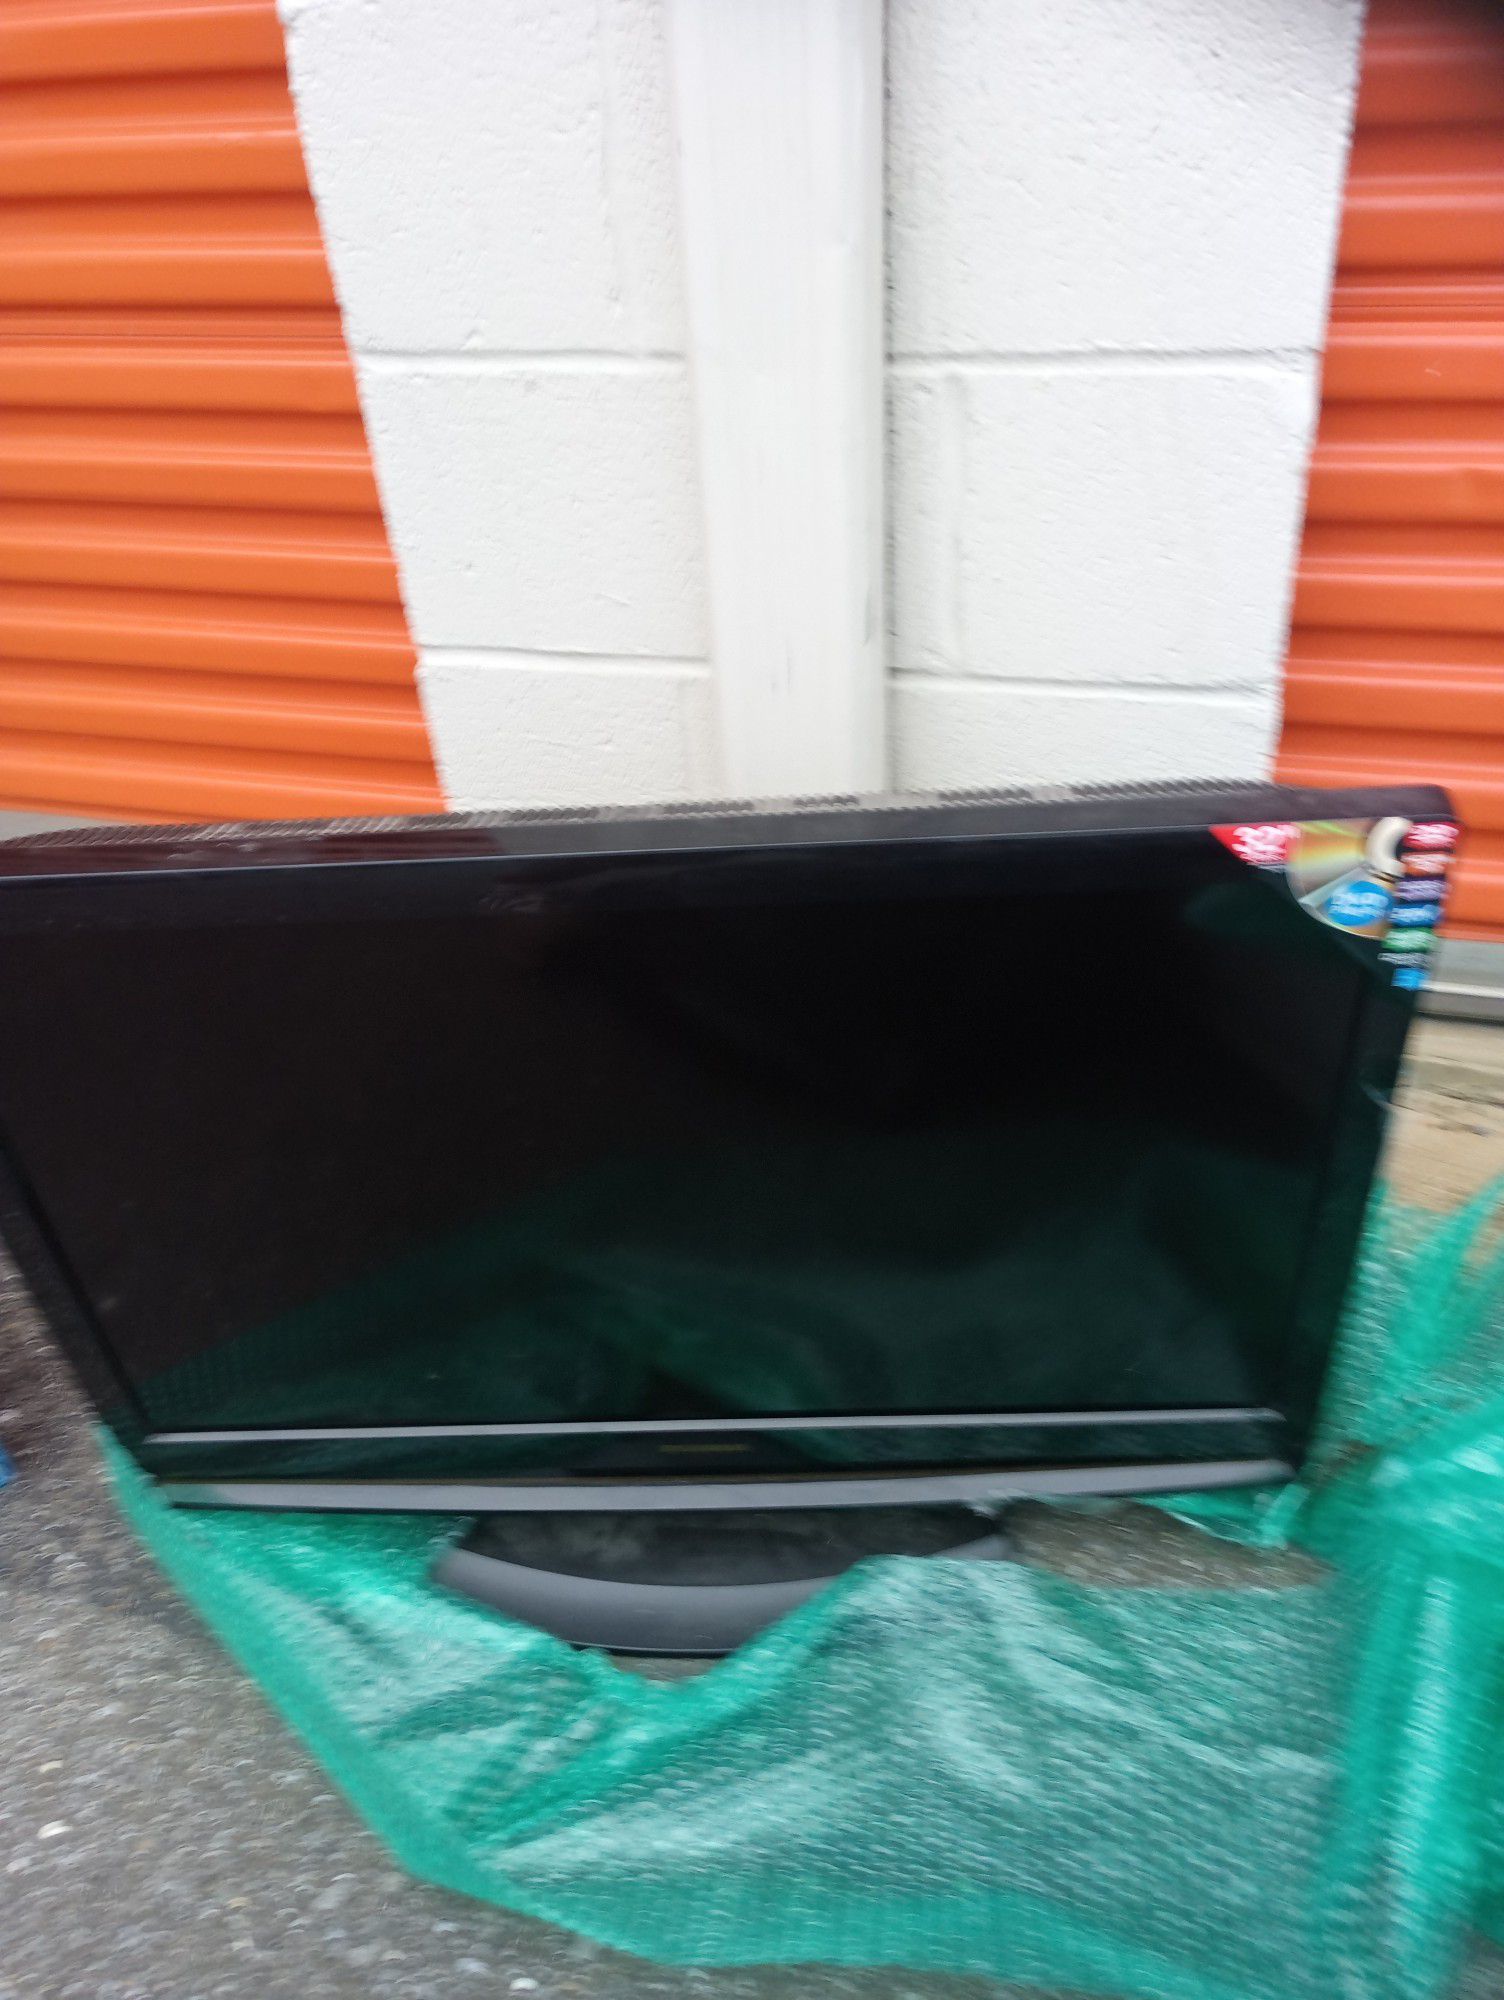 32 inches silvania tv with DVD player